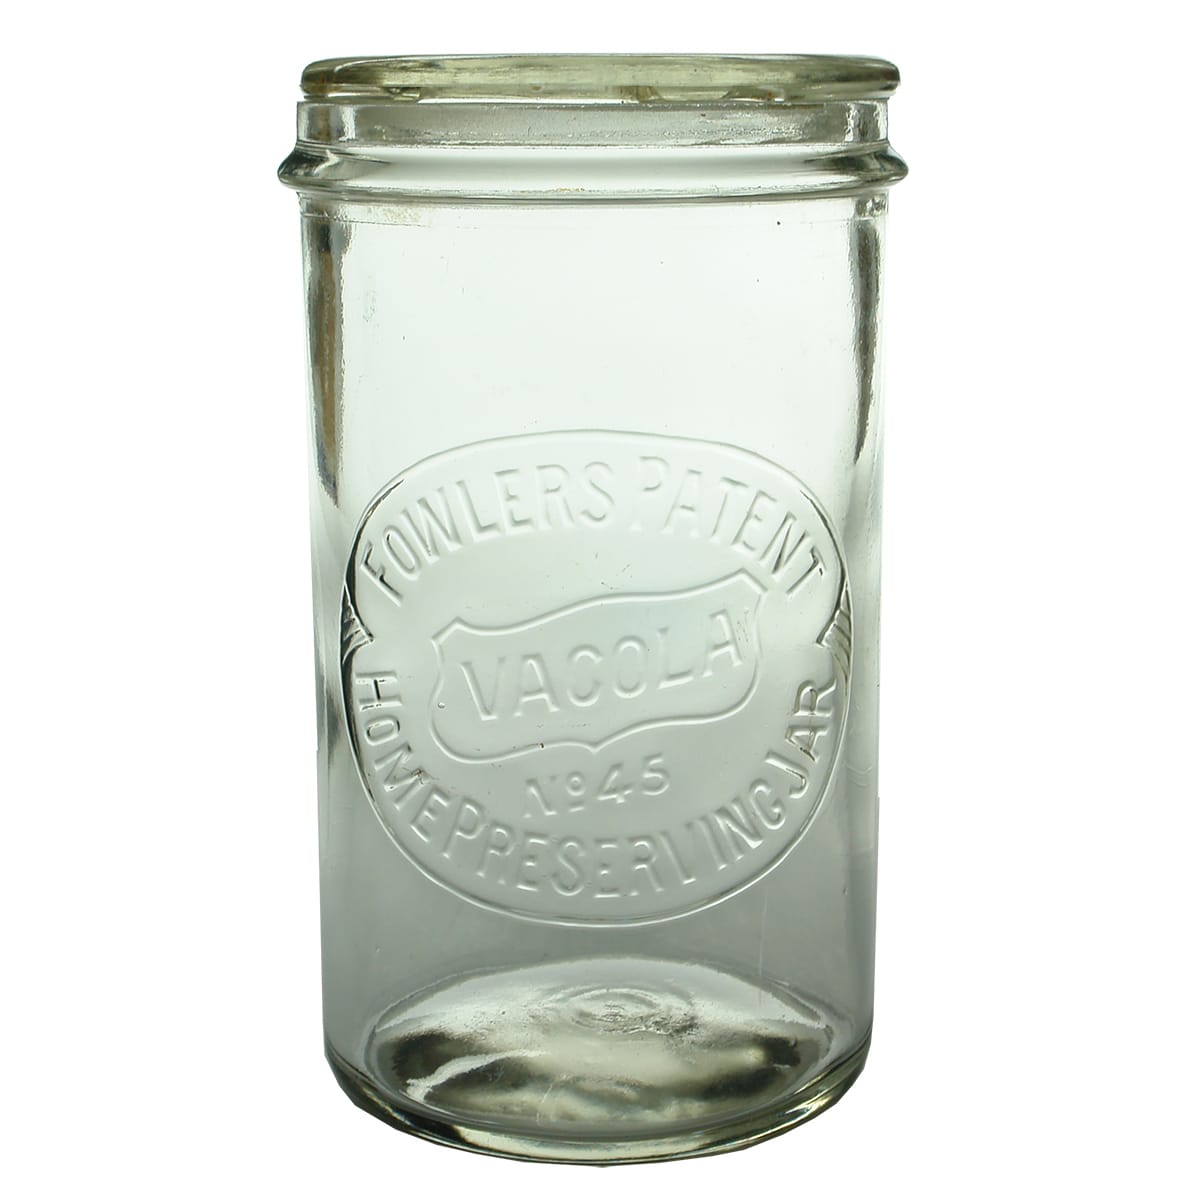 Fruit Jar. Fowlers Patent Vacola No 45. Home Preserving Jar. With Lid. Clear. Quart.